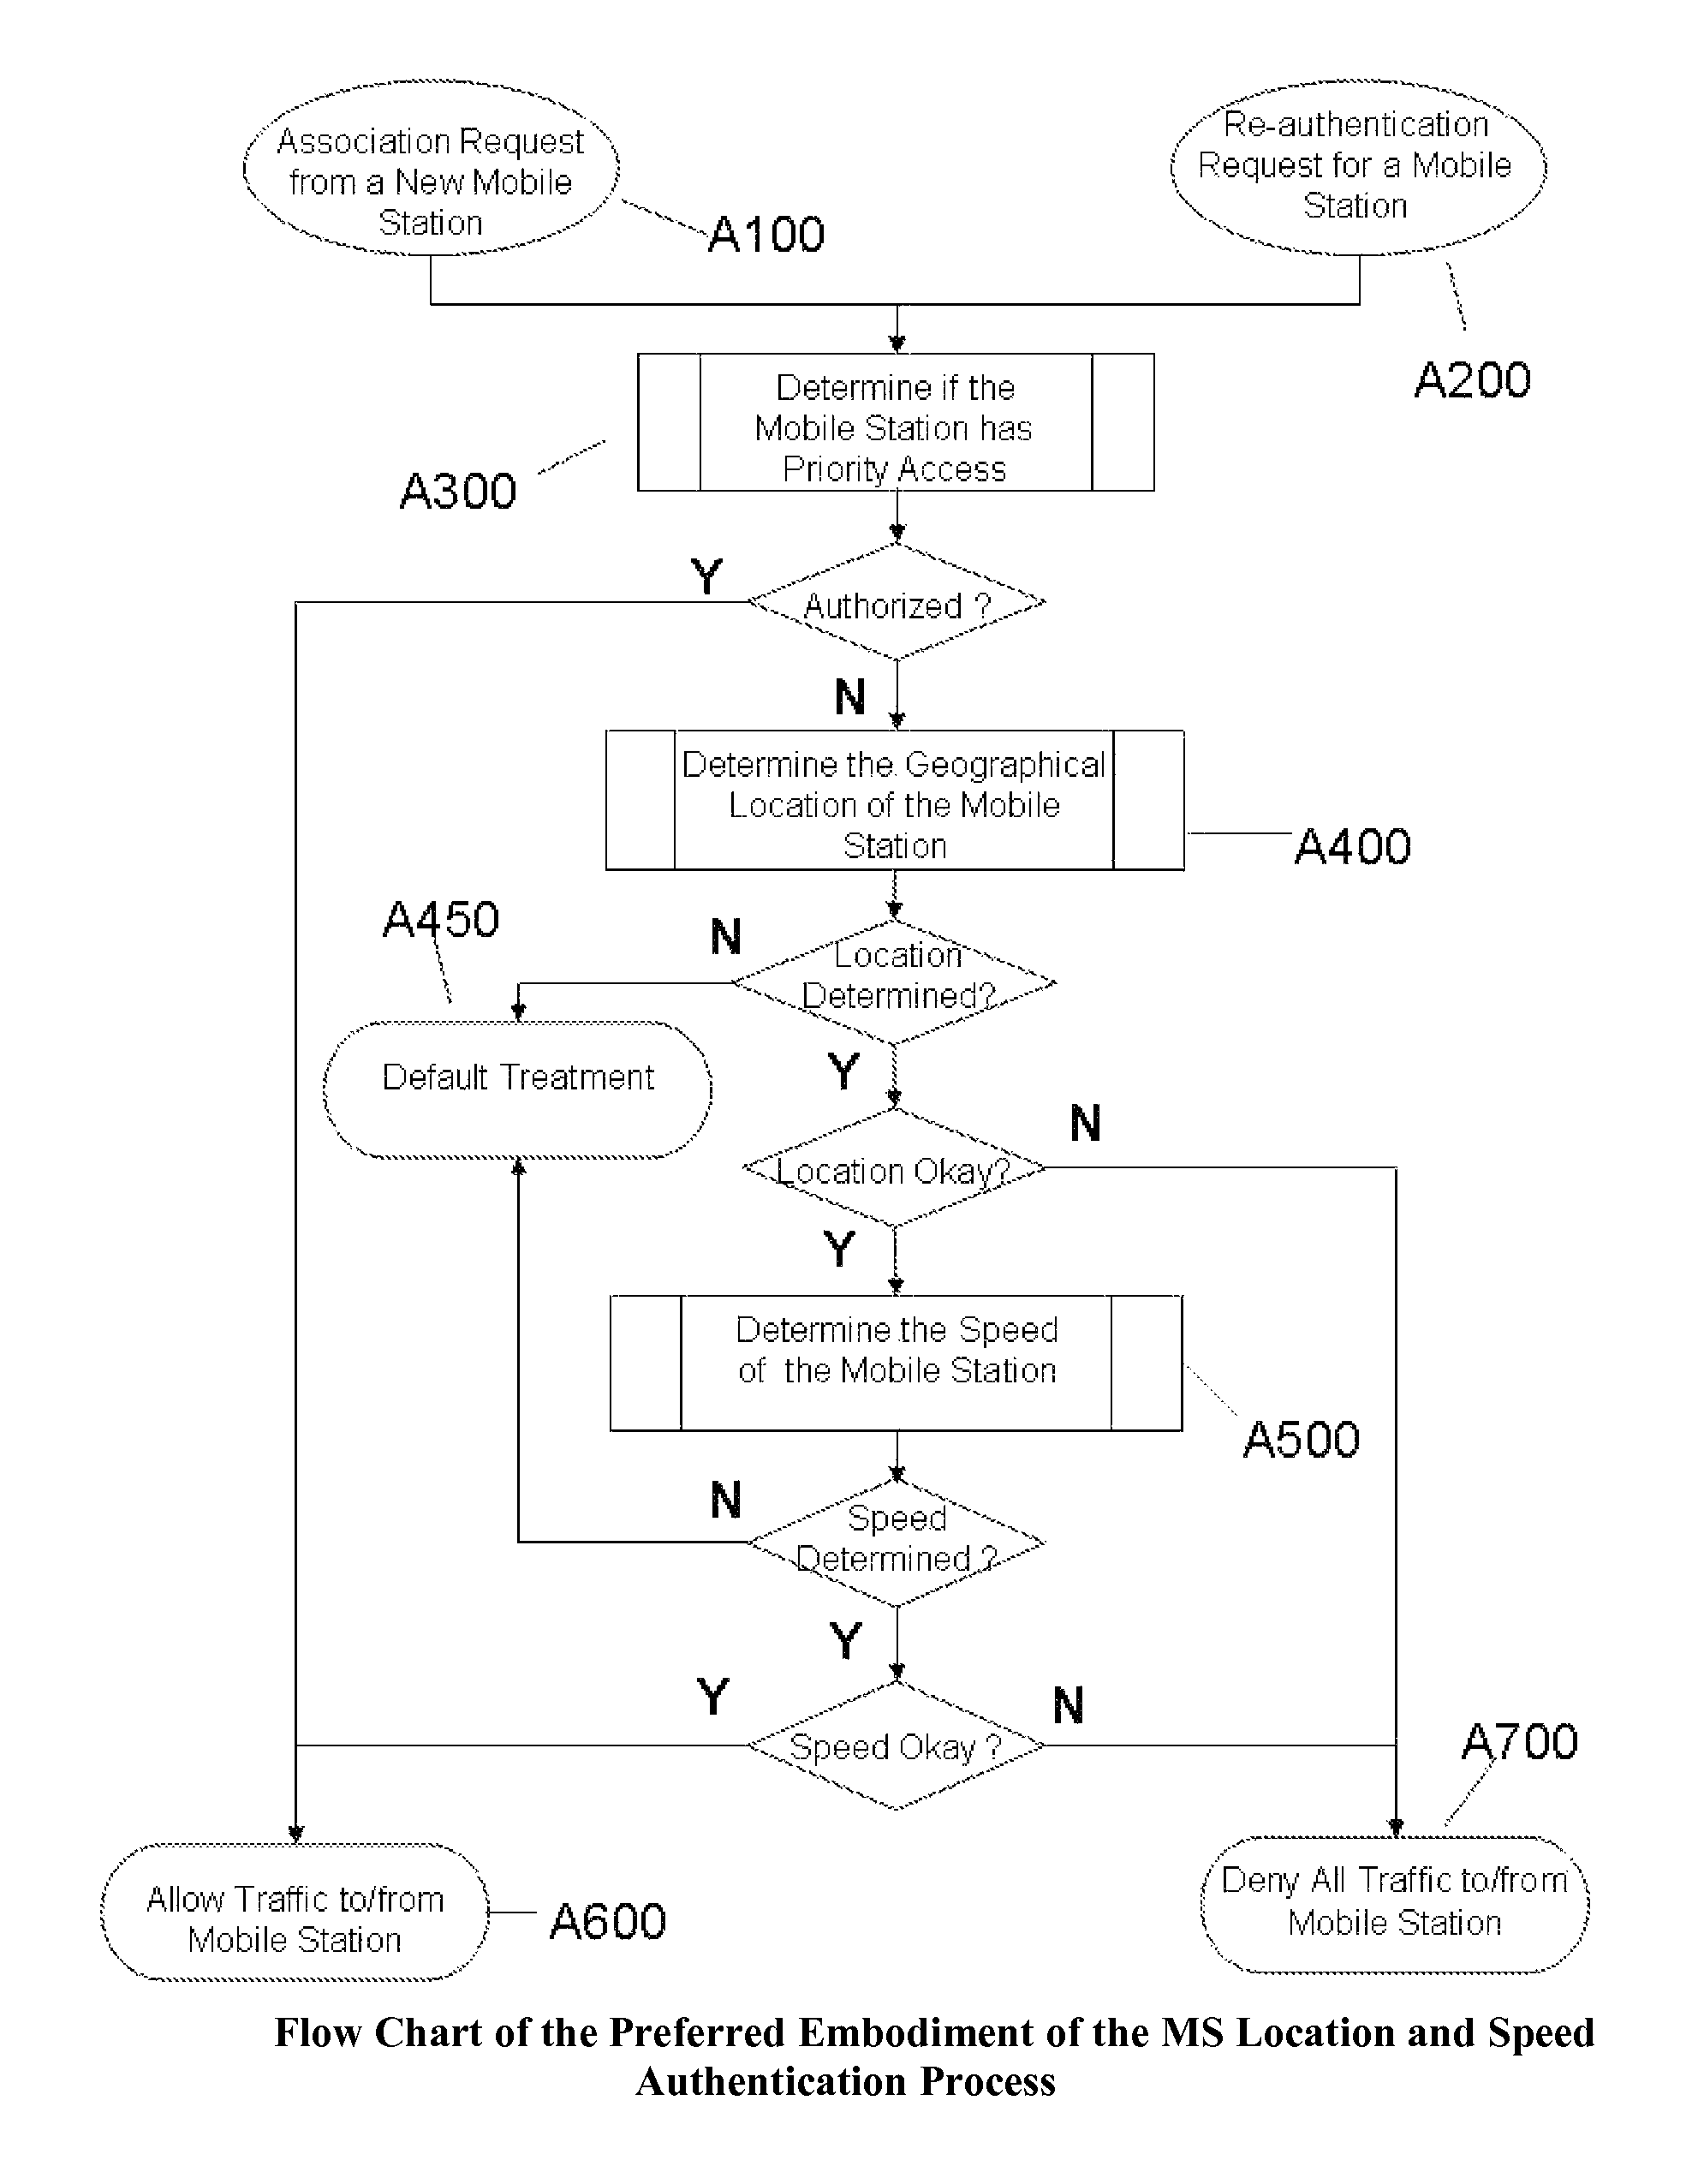 Systems and methods for speed and location based network access and features control